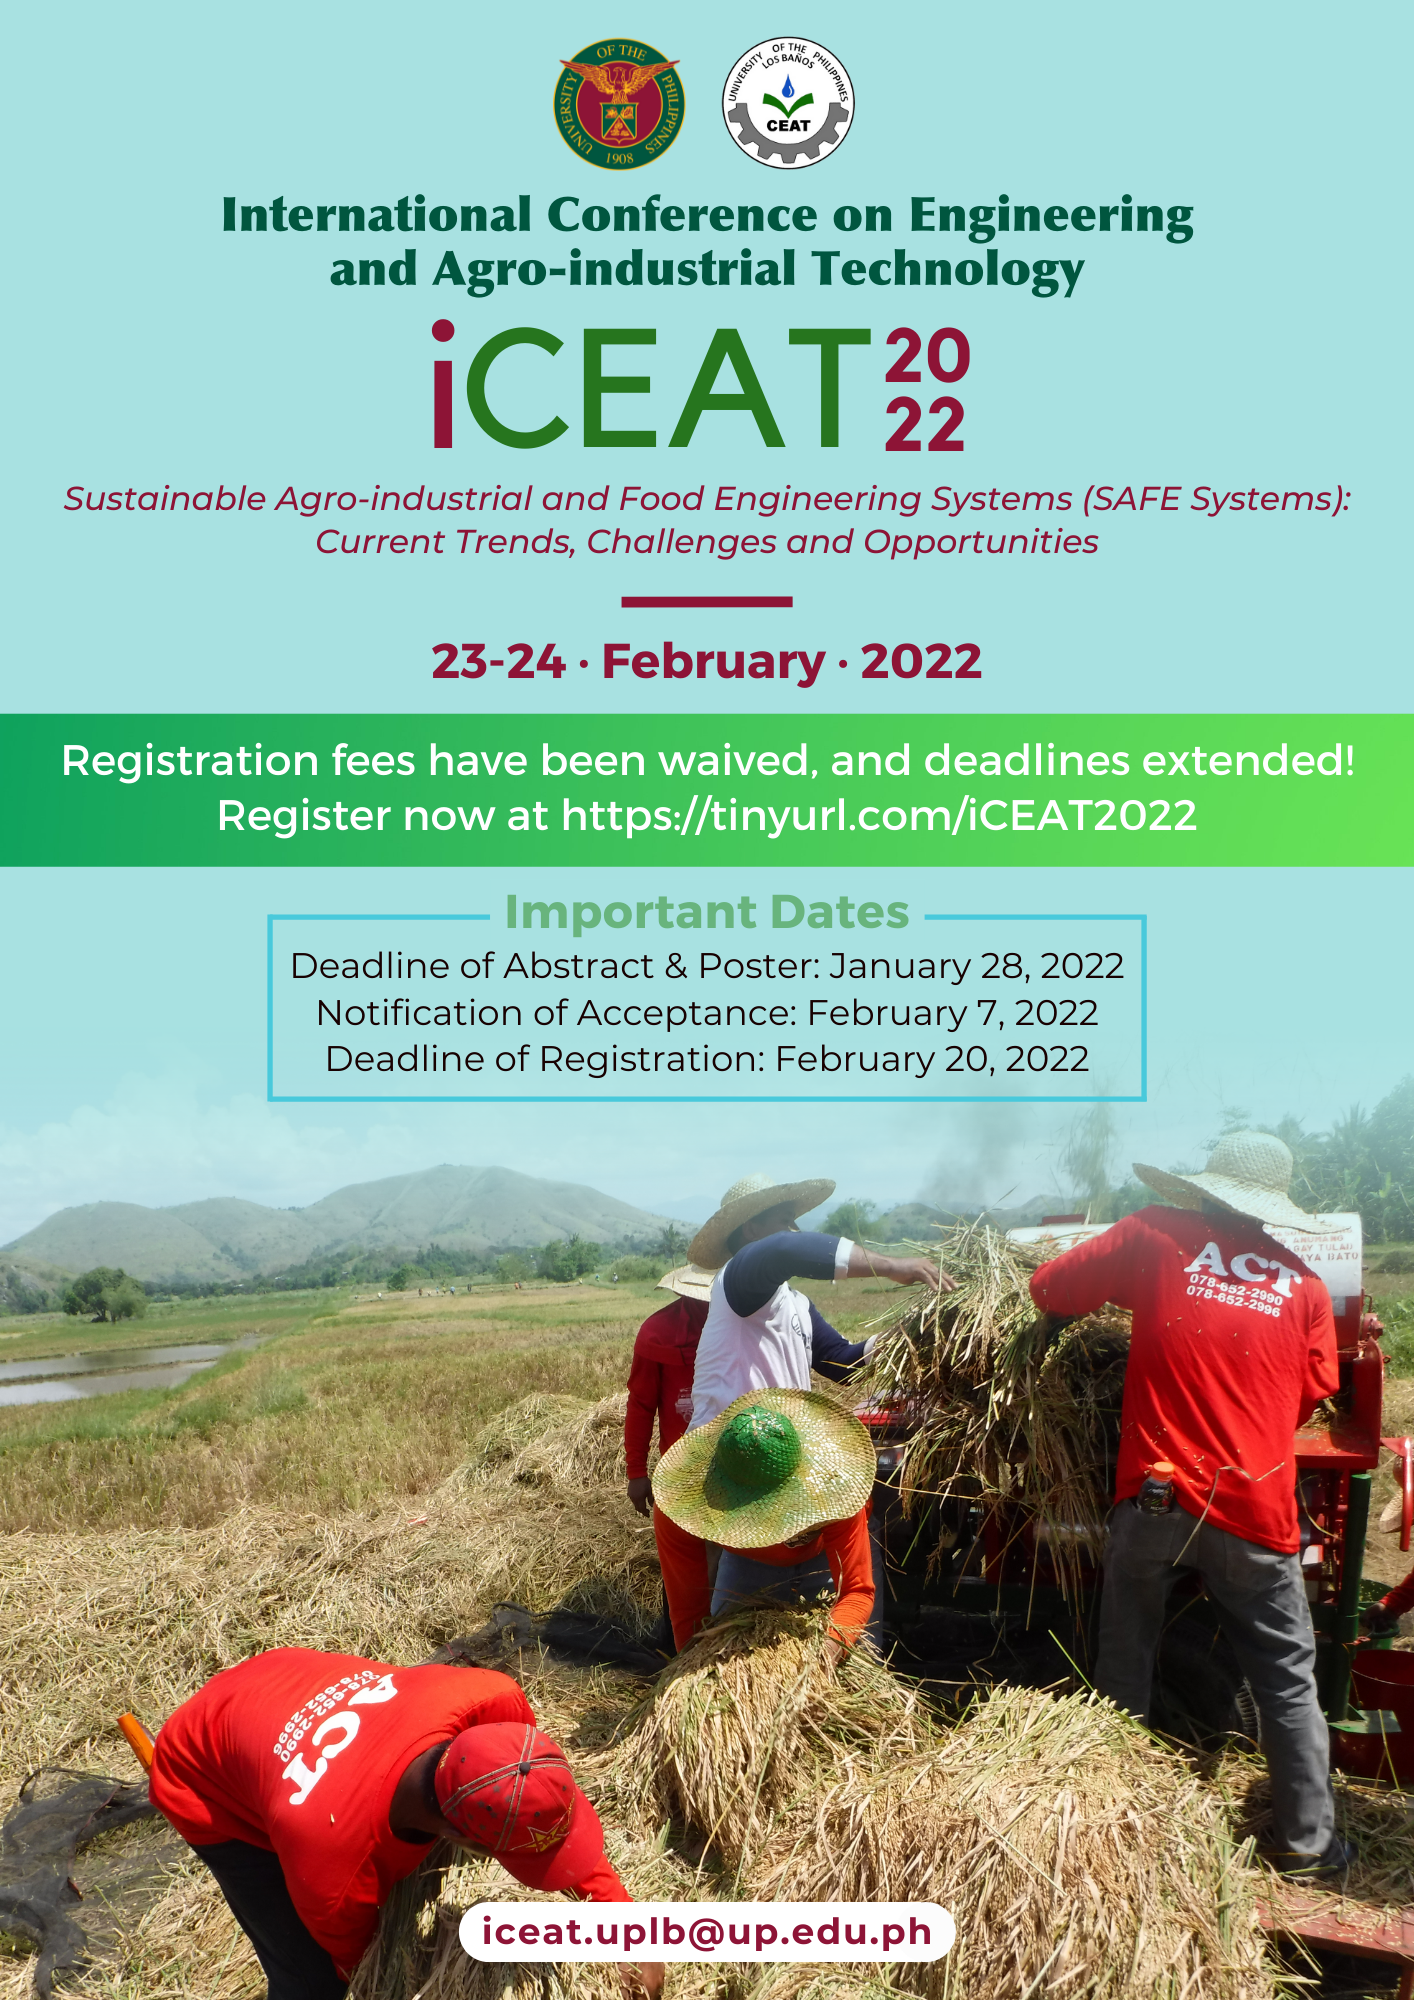 International Conference on Engineering and Agro-industrial Technology (iCEAT)